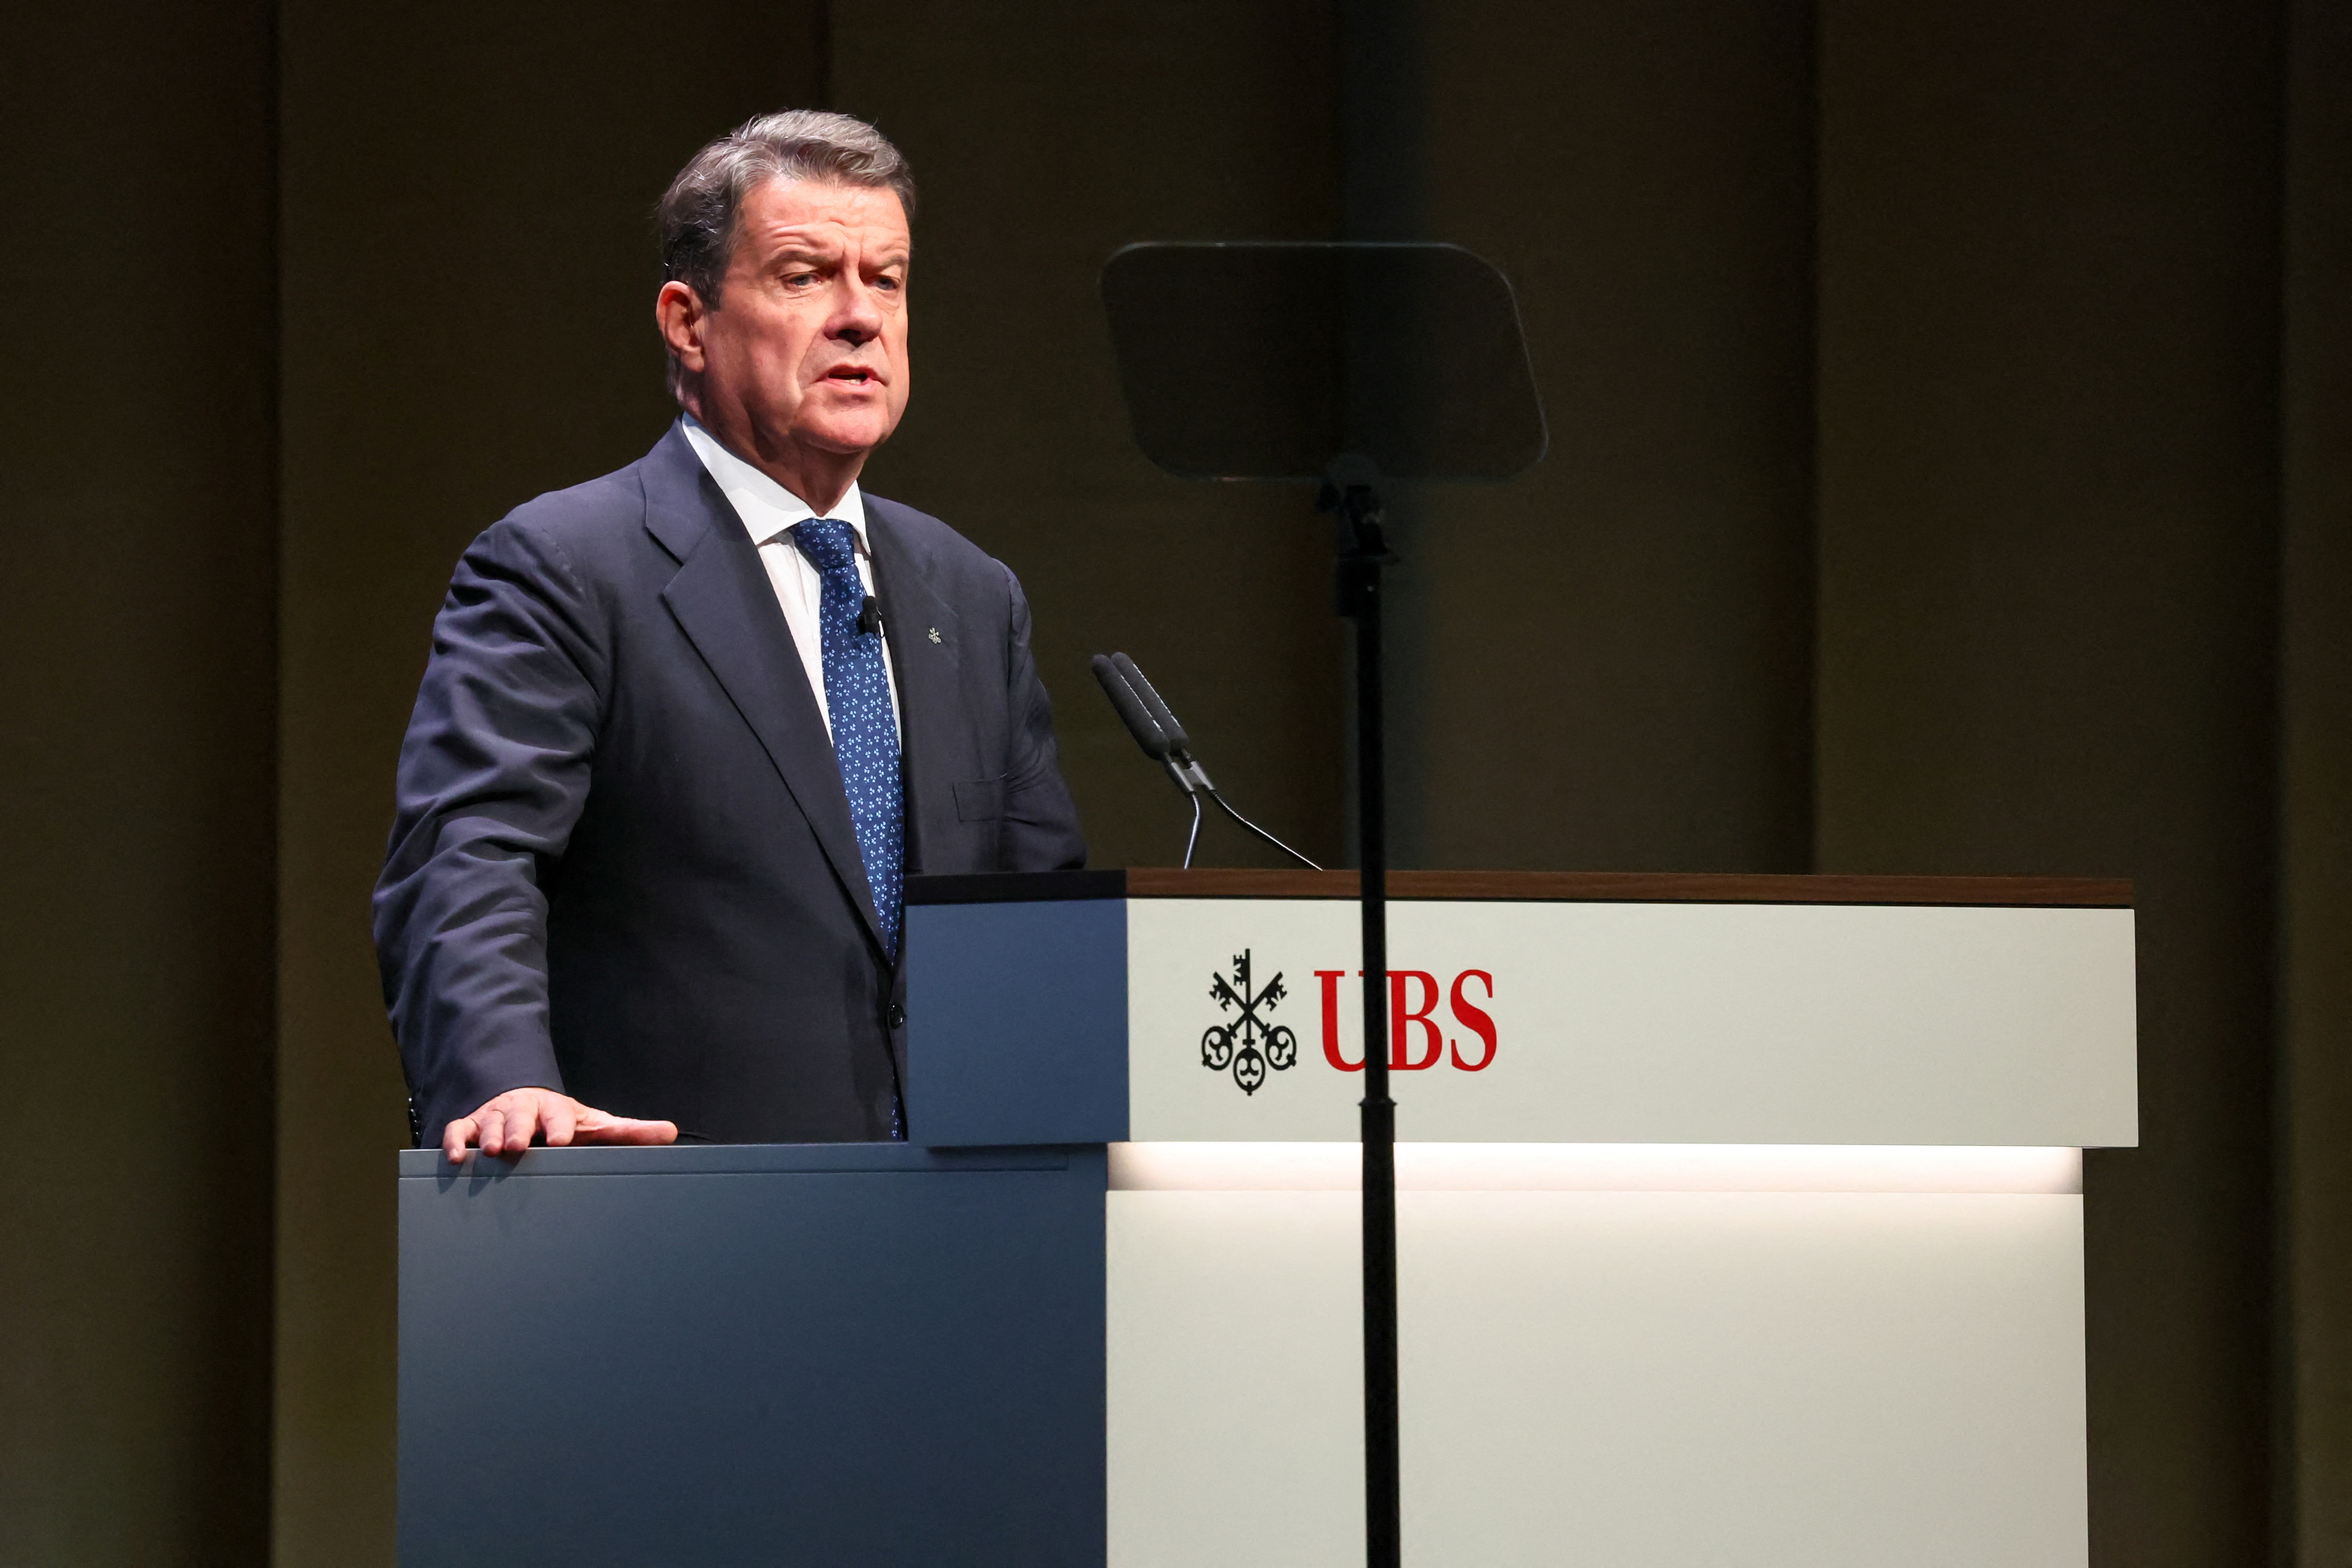 UBS Annual General Meeting in Basel